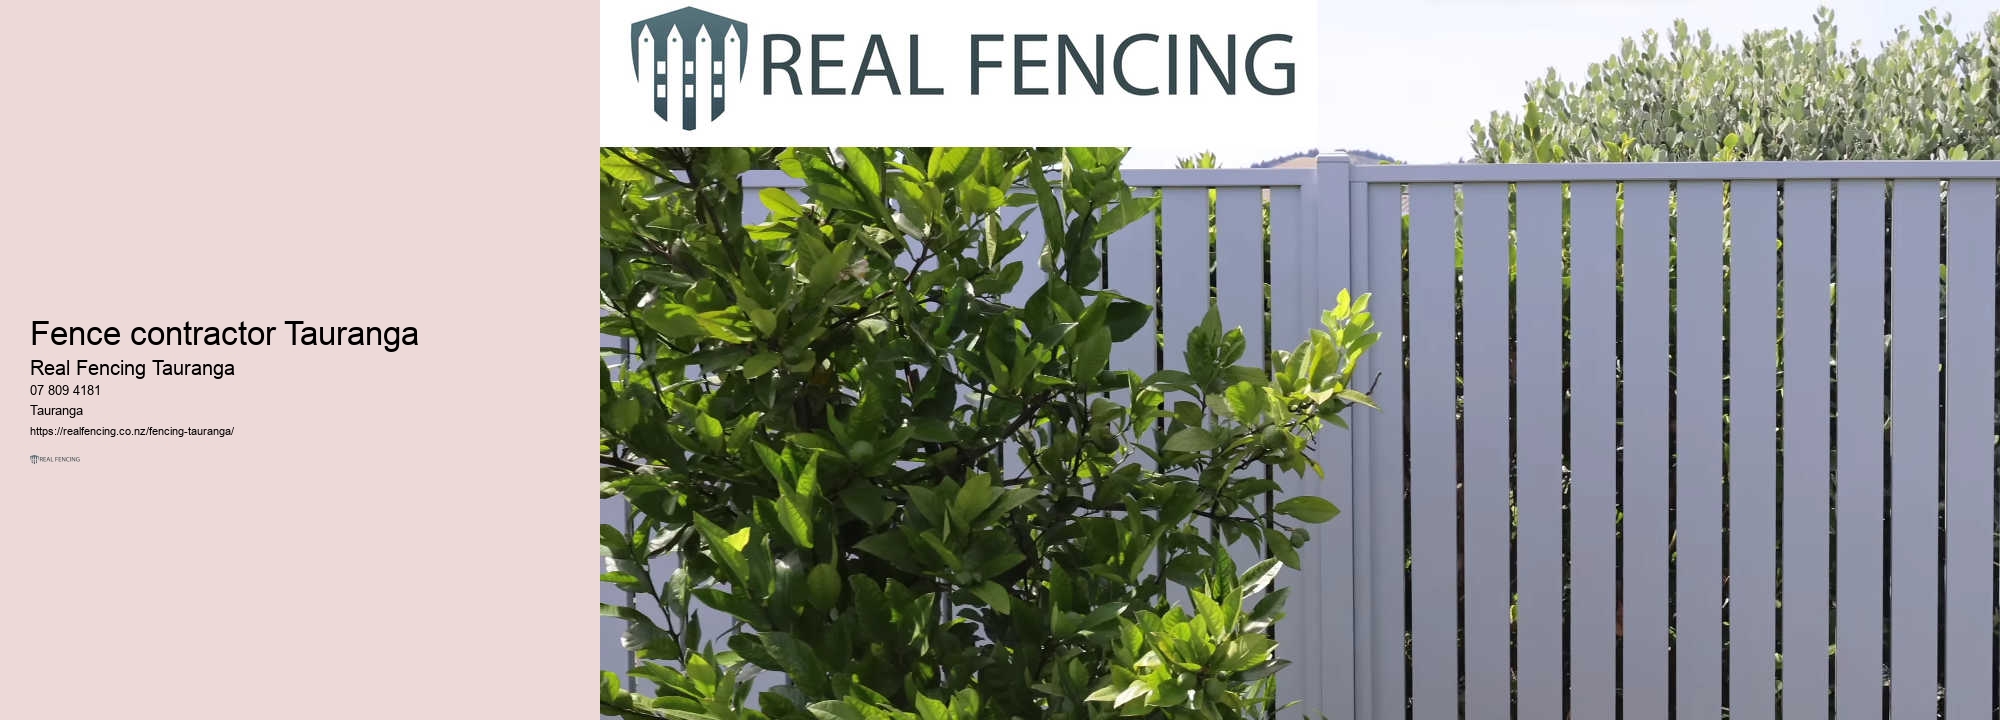 Timber fencing and gates